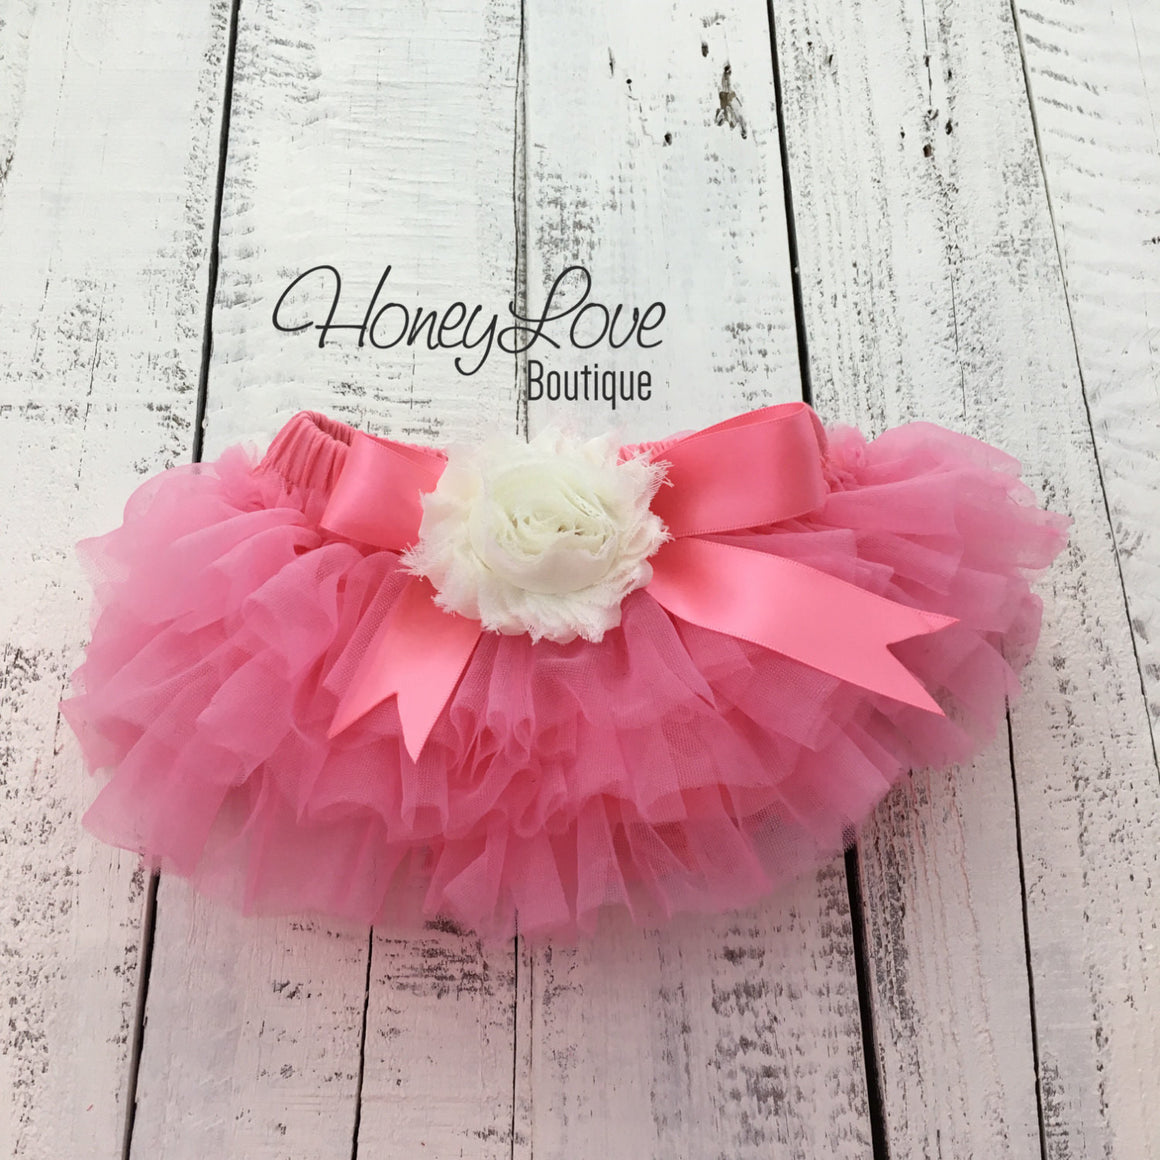 PERSONALIZED Name Outfit - Coral Pink and Gold Glitter - Ivory flower embellished tutu skirt bloomers - HoneyLoveBoutique